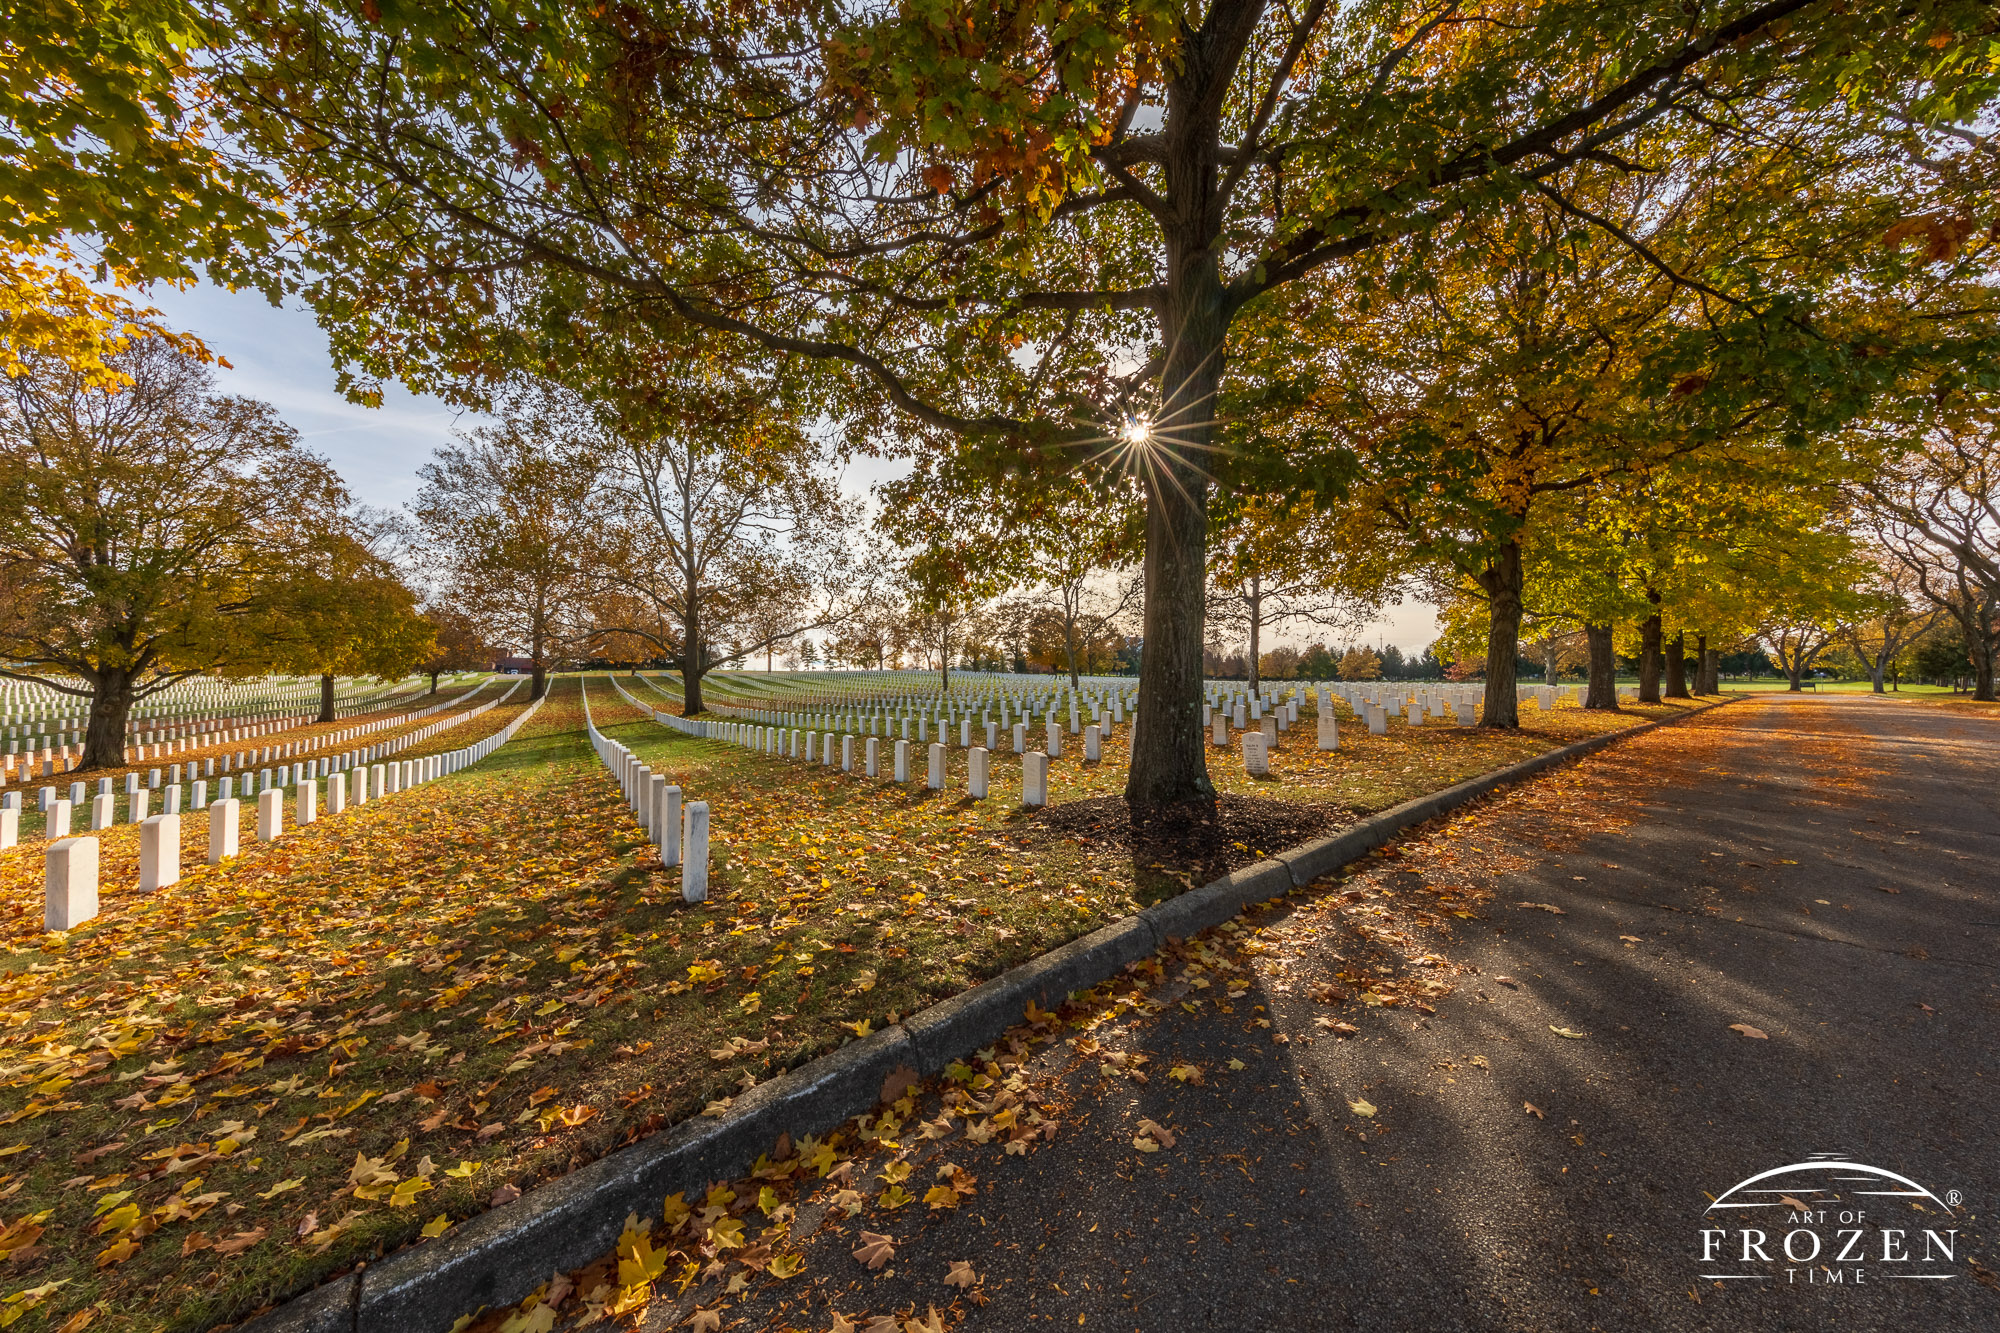 A tree sporting its fall colors filters the autumn evening light as it stands among rows of white marble headstones at Dayton National Cemetery